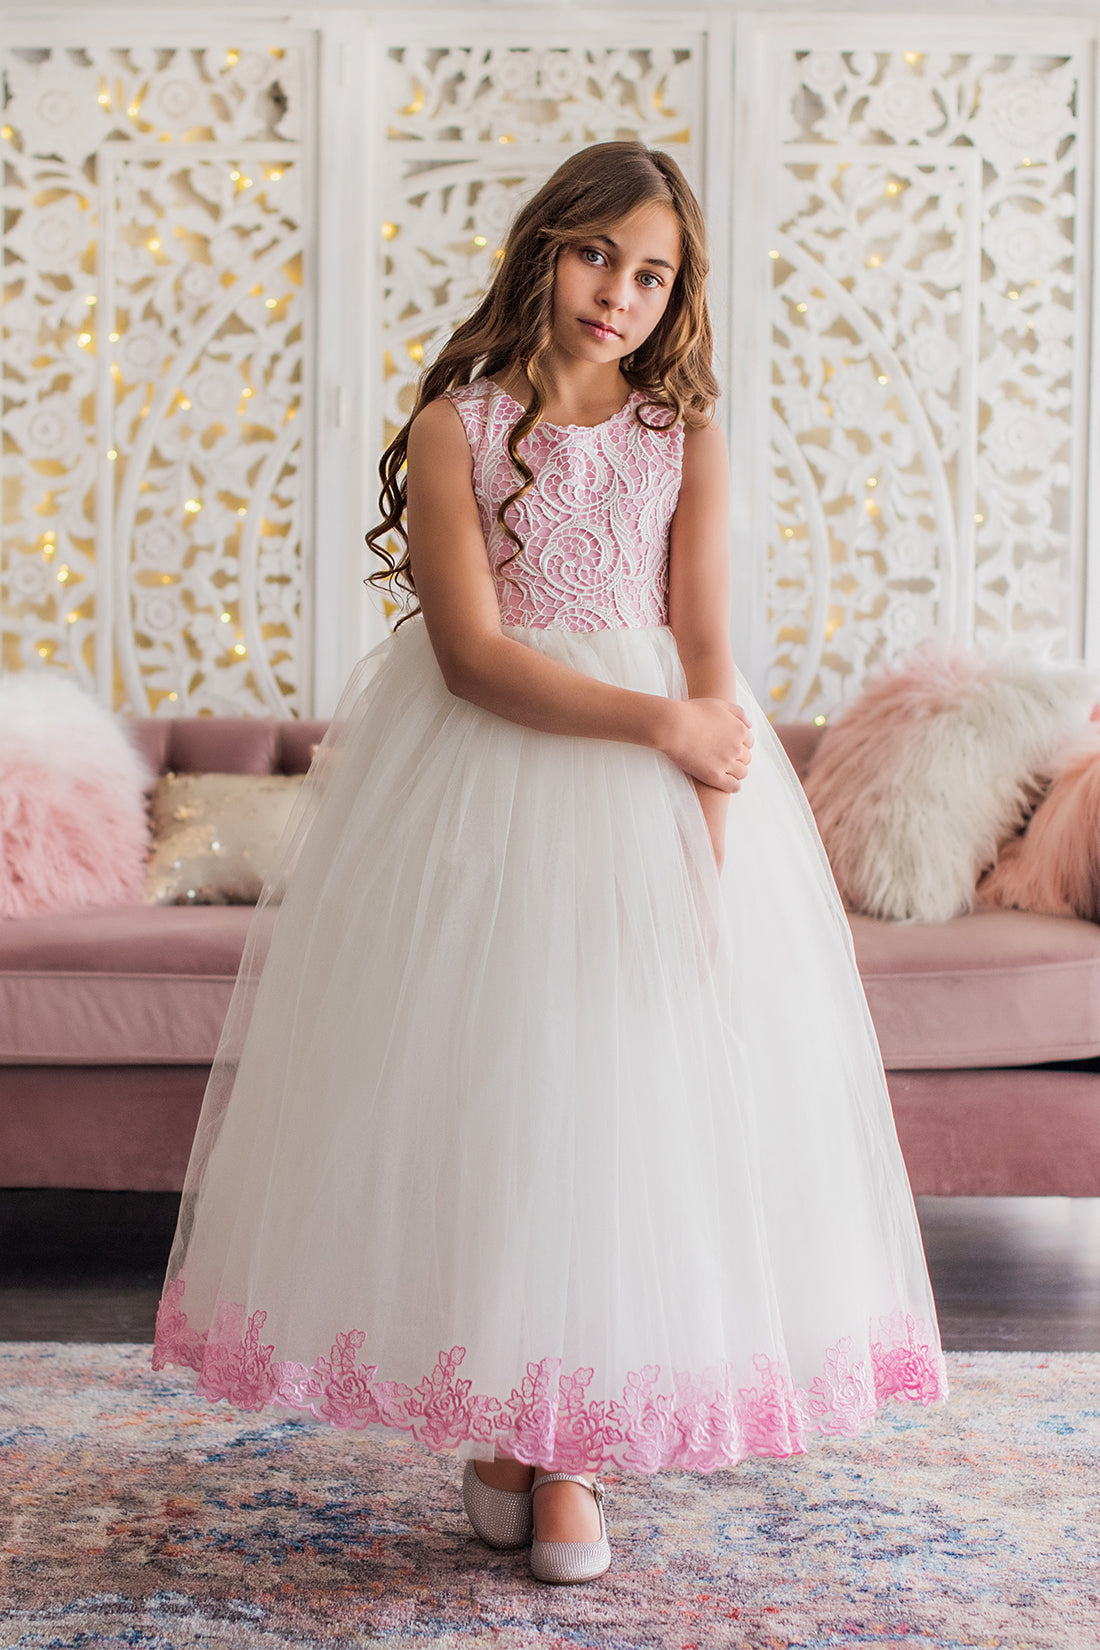 Blush Pink Lace Tulle Formal Flower Girl Dress for Special Occasion  Bridesmaid Party Wedding Pageant Birthday First Communion Photoshoot - Etsy  Australia | Pink flower girl dresses, Flower girl dresses, Flower girl